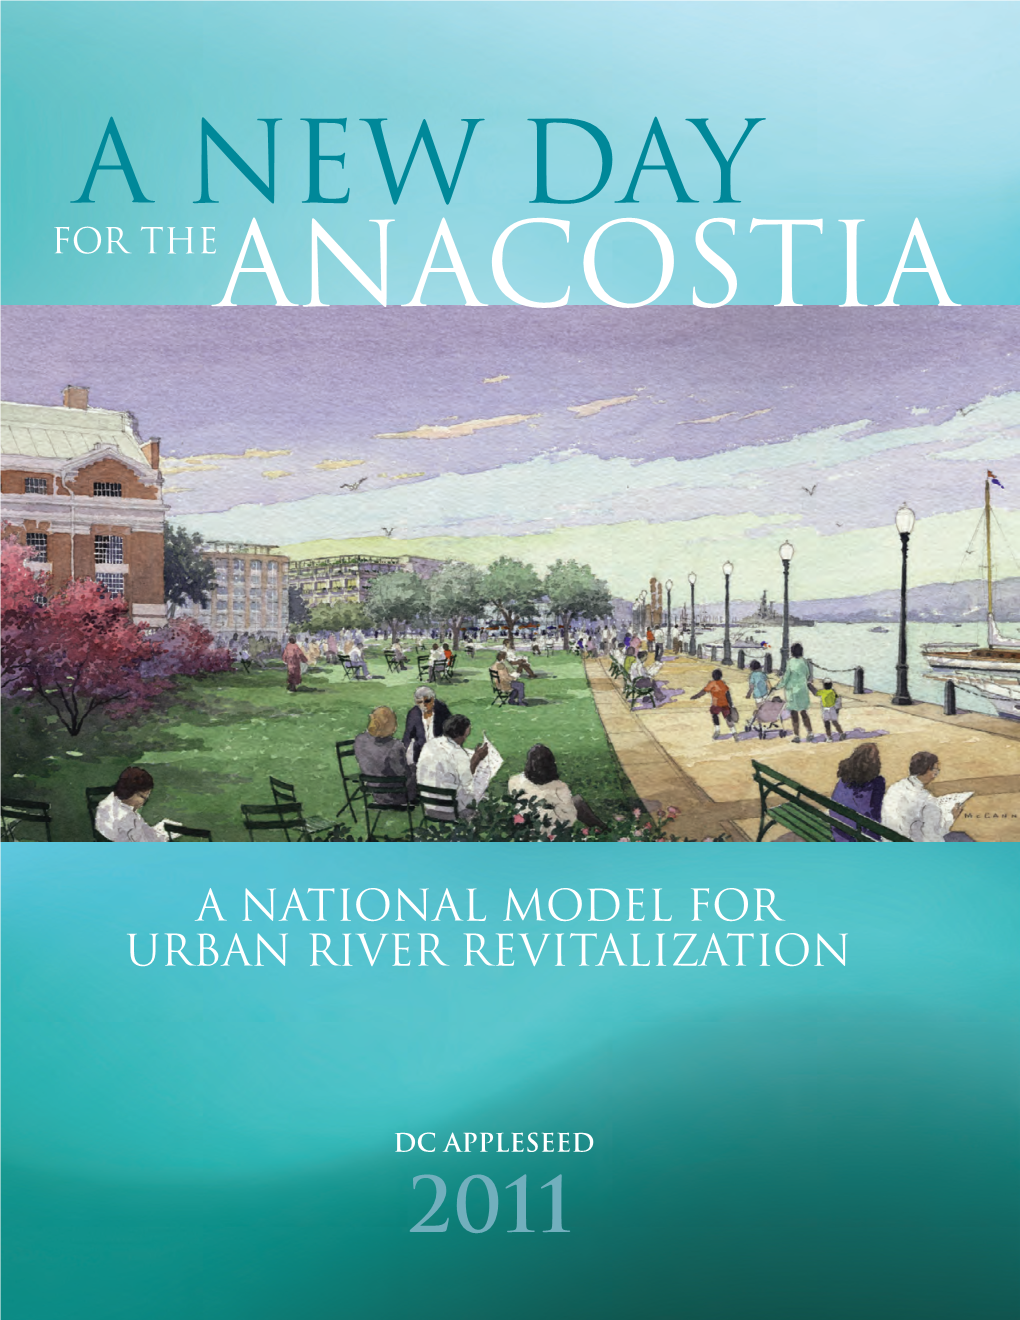 A New Day for the Anacostia